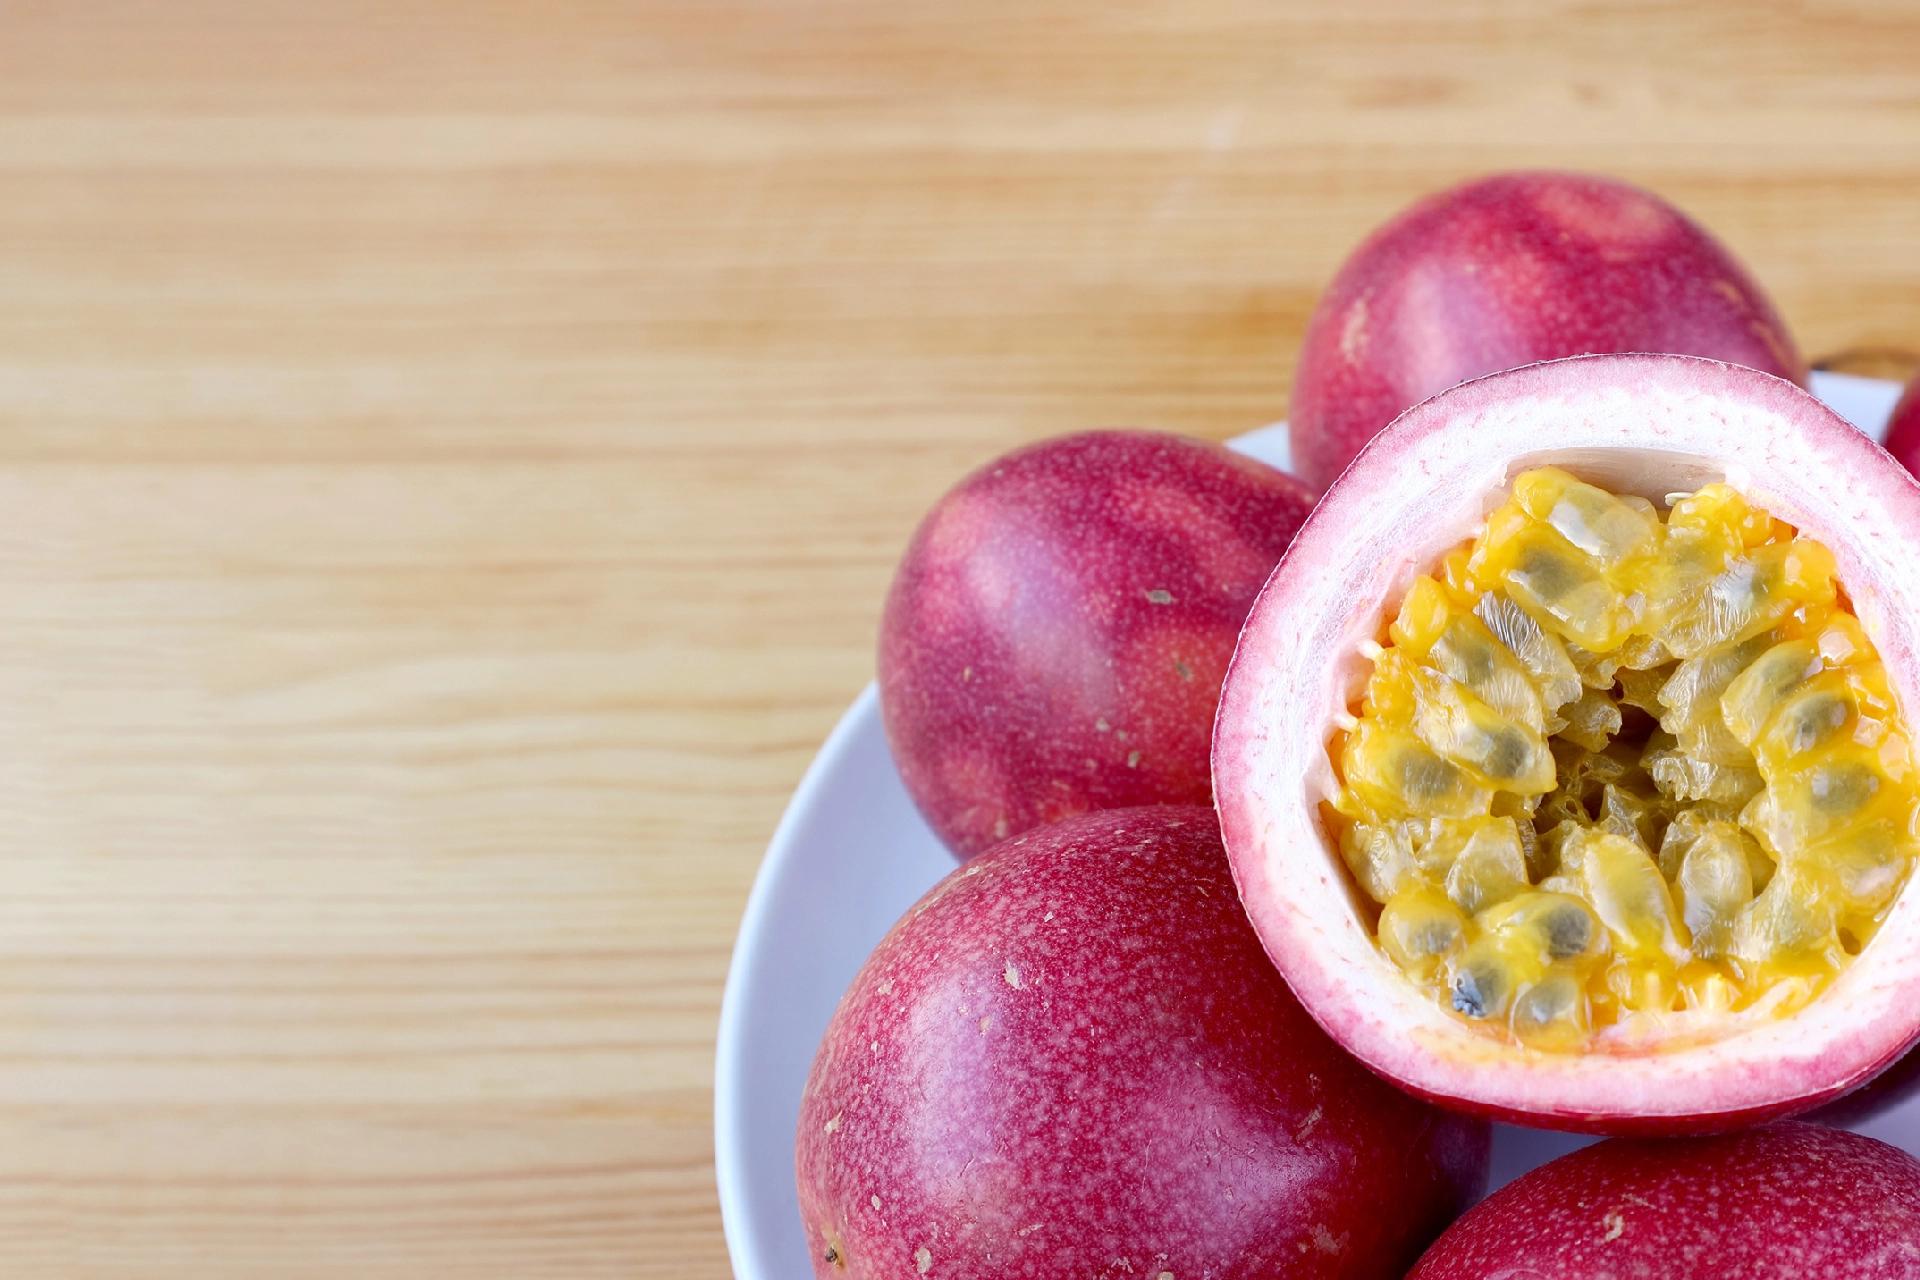 A Comprehensive Guide on Boosting your Health and Immunity With Passion Fruit